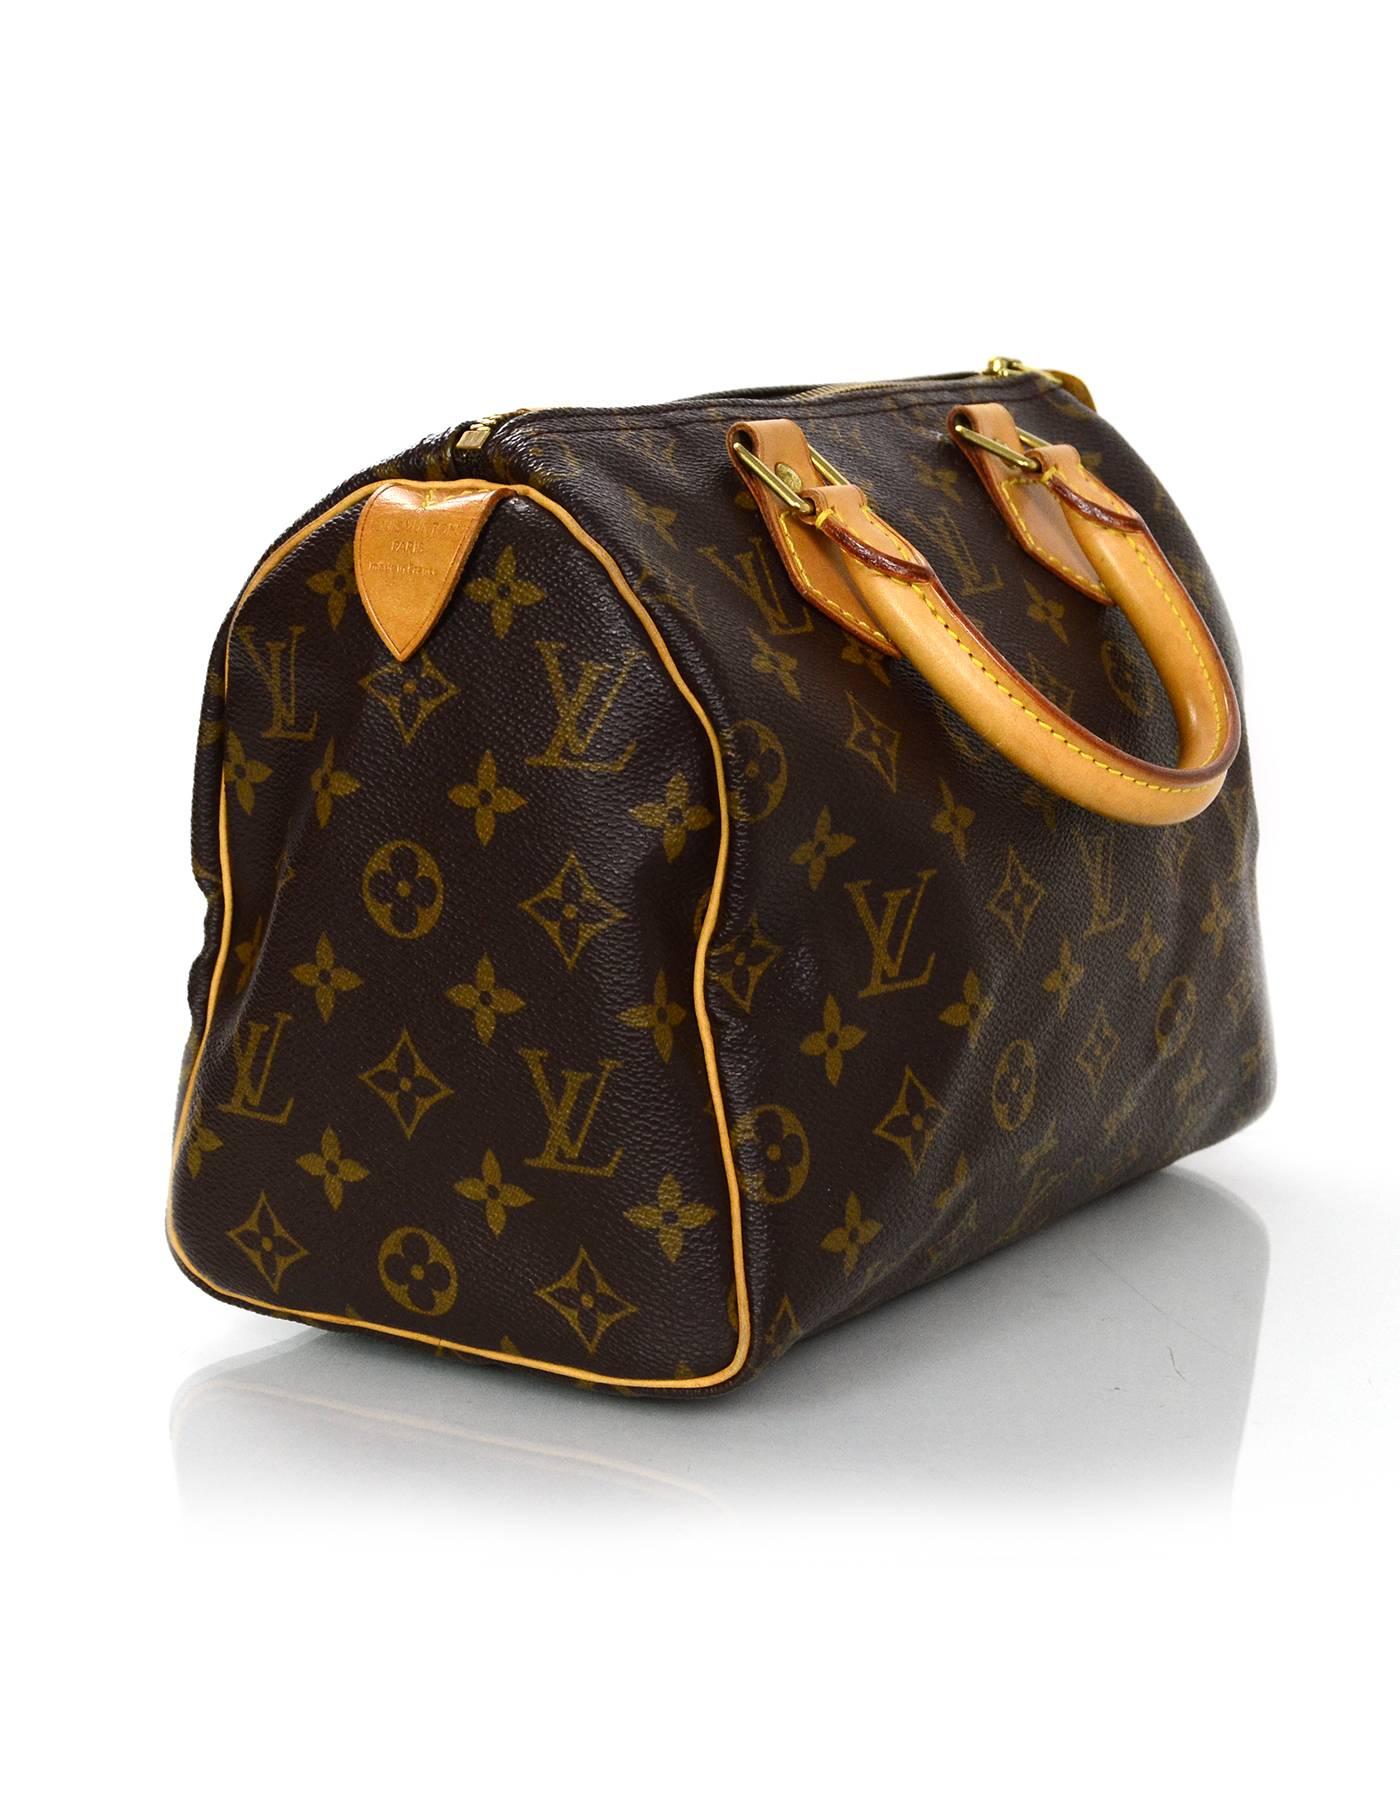 Louis Vuitton Monogram Speedy 25 Bag
Features leather wrapped handles

Made In: France
Year of Production: 1999
Color: Brown
Hardware: Goldtone
Materials: Leather and coated canvas
Lining: Brown canvas
Closure/Opening: Zip across top
Exterior